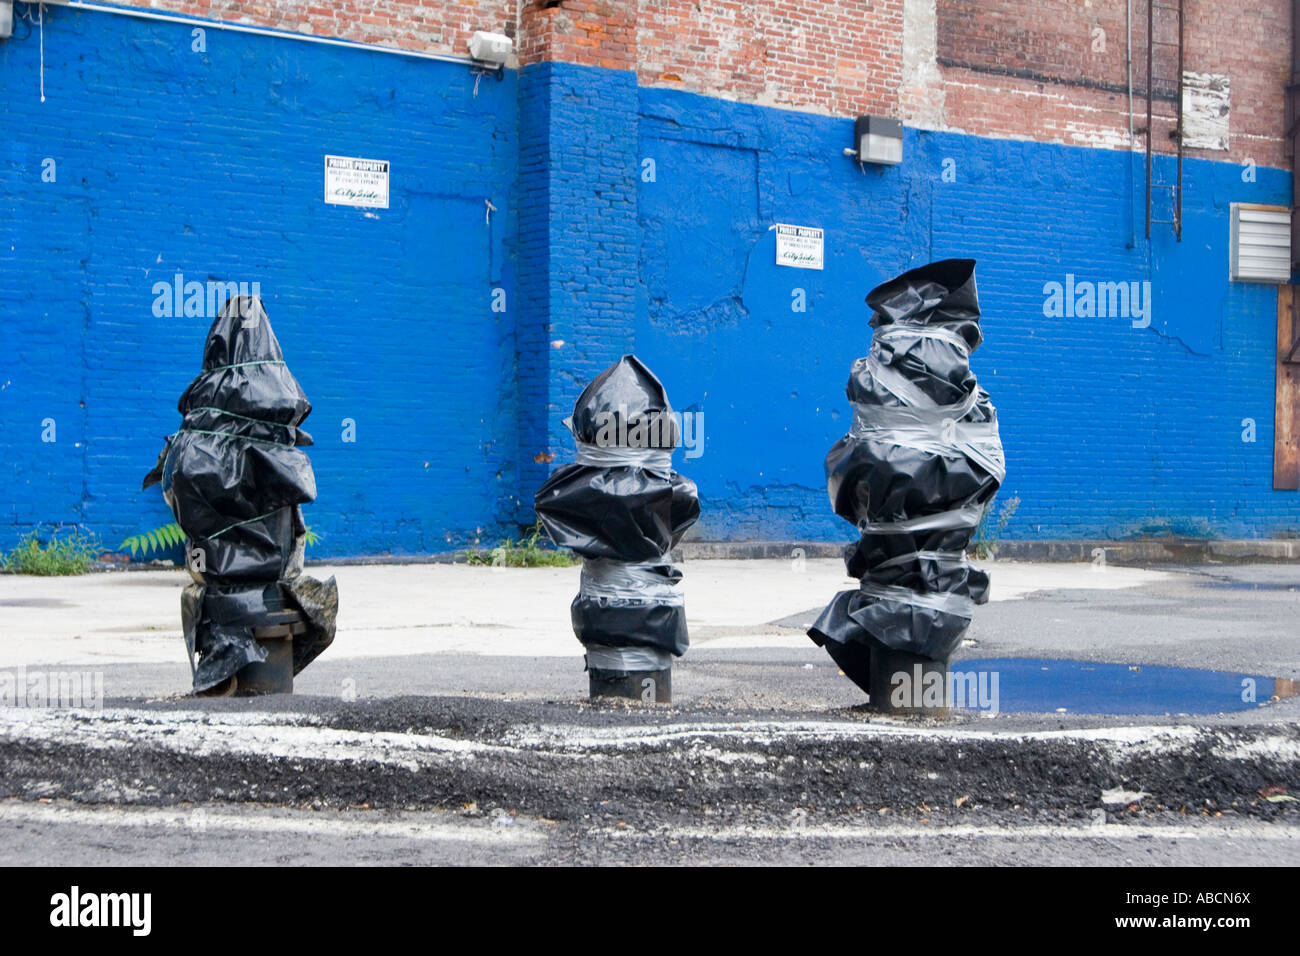 Three fire hydrants covered with black trash bags in Boston, Massachusetts Stock Photo